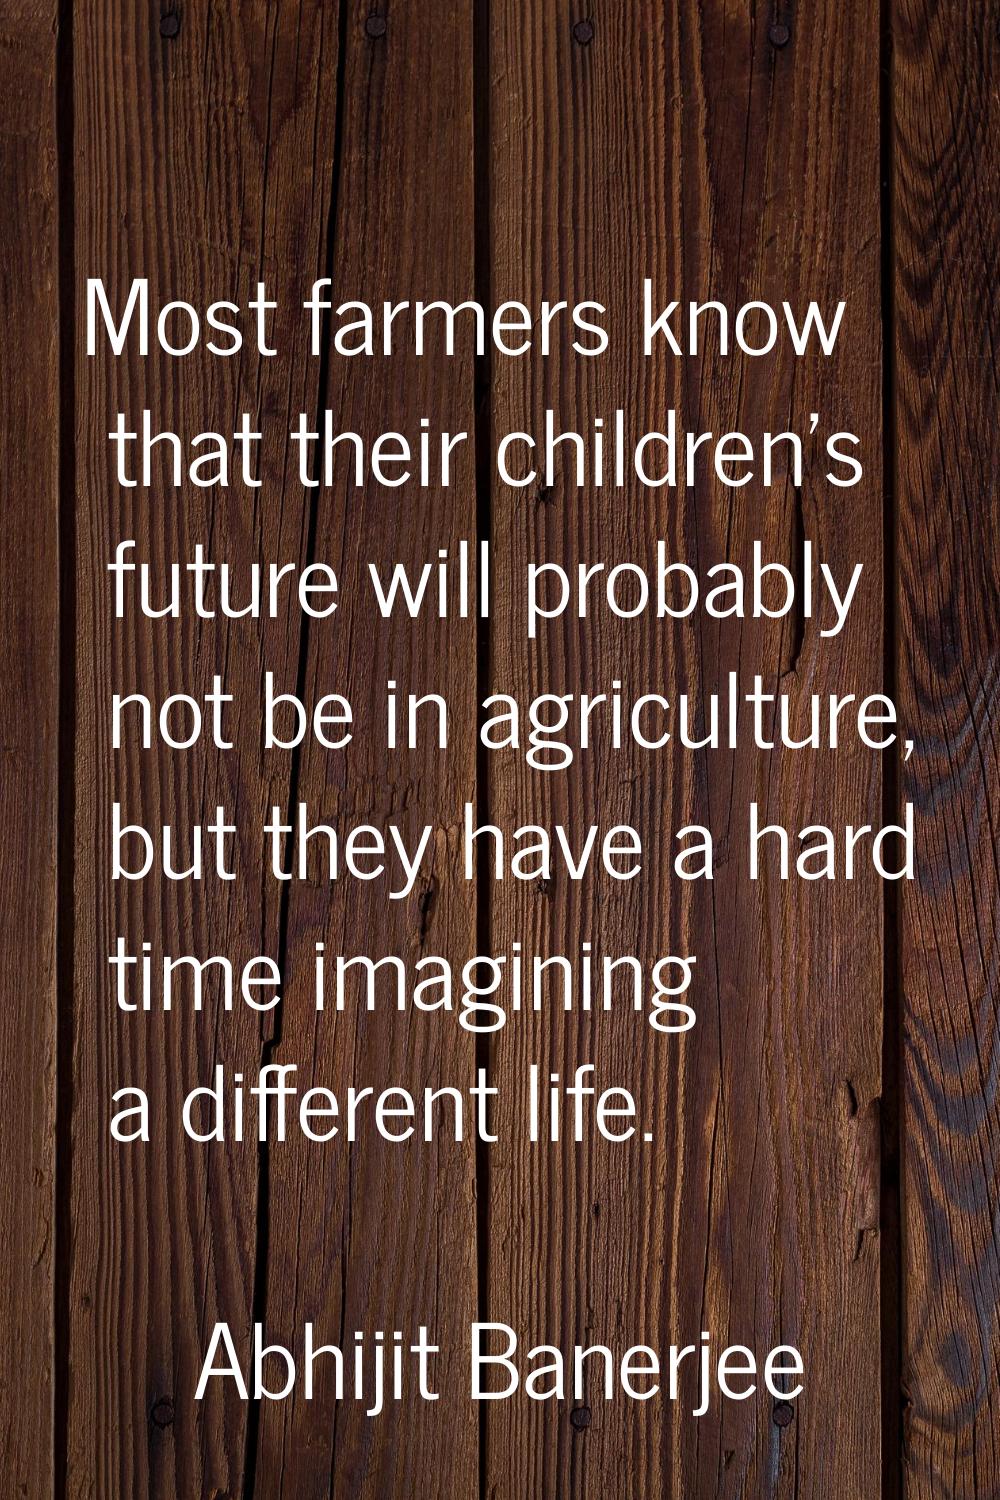 Most farmers know that their children's future will probably not be in agriculture, but they have a